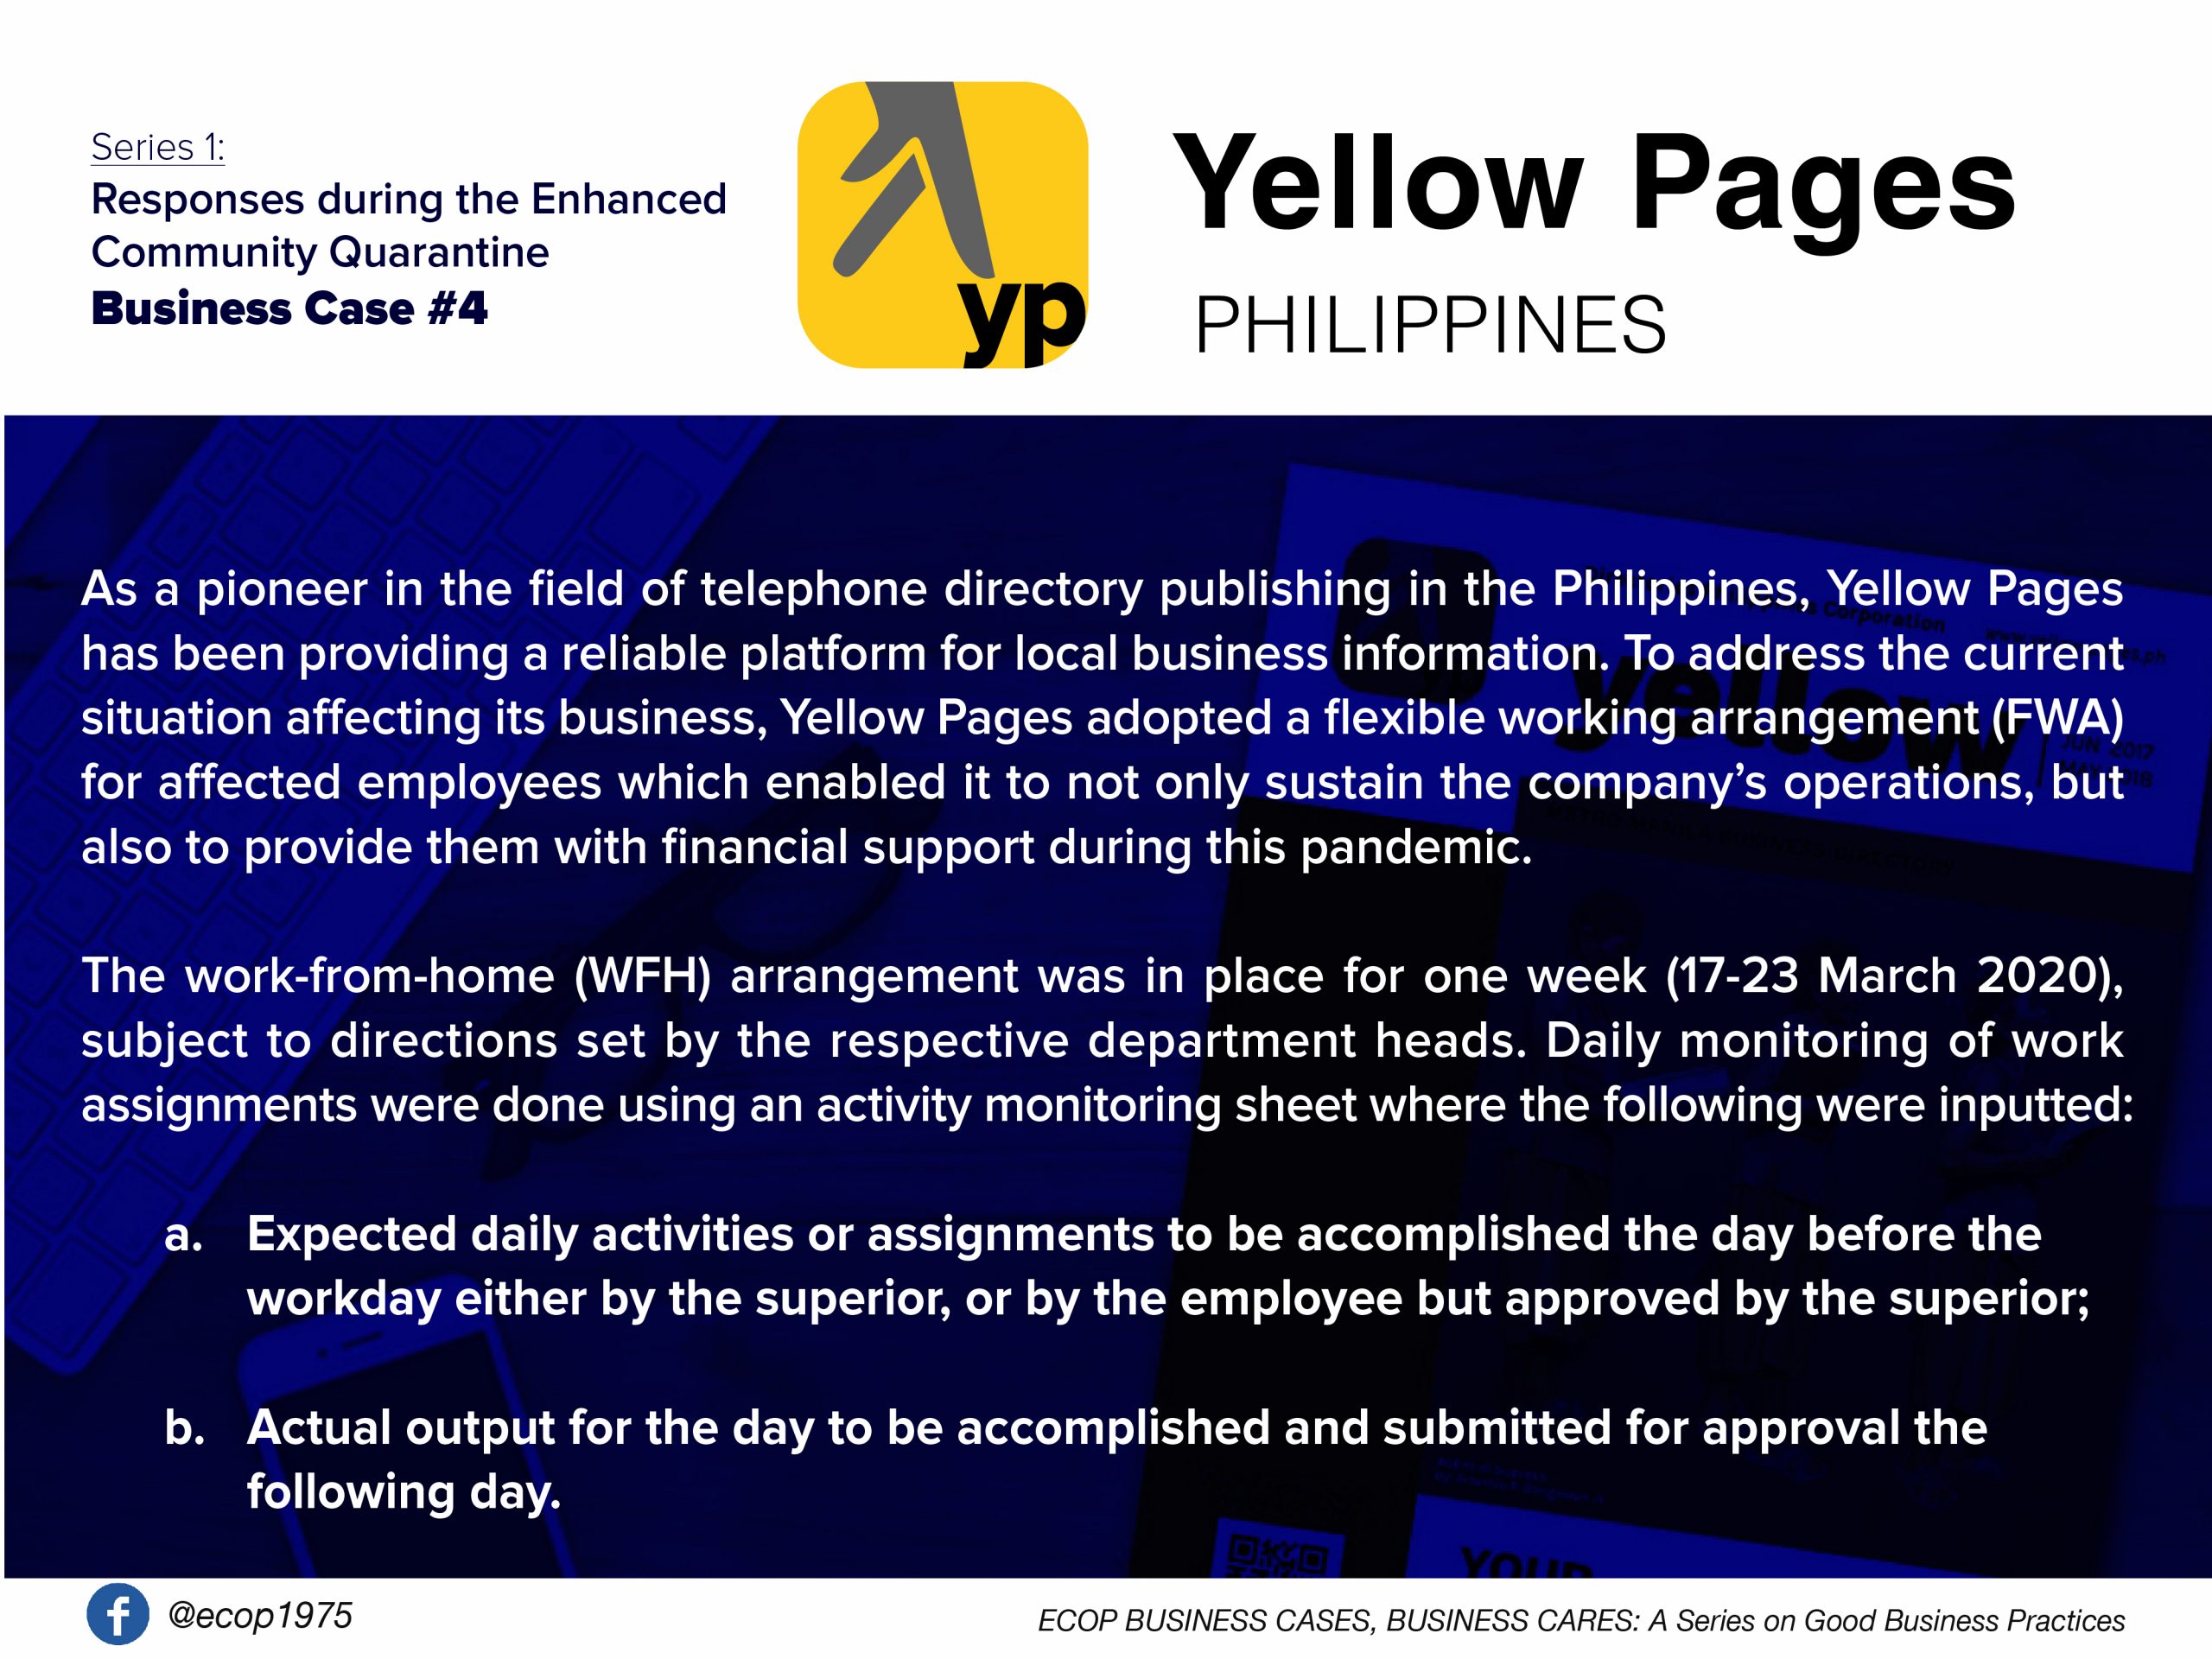 01-Yellow Pages Philippines amid the COVID-19 crisis